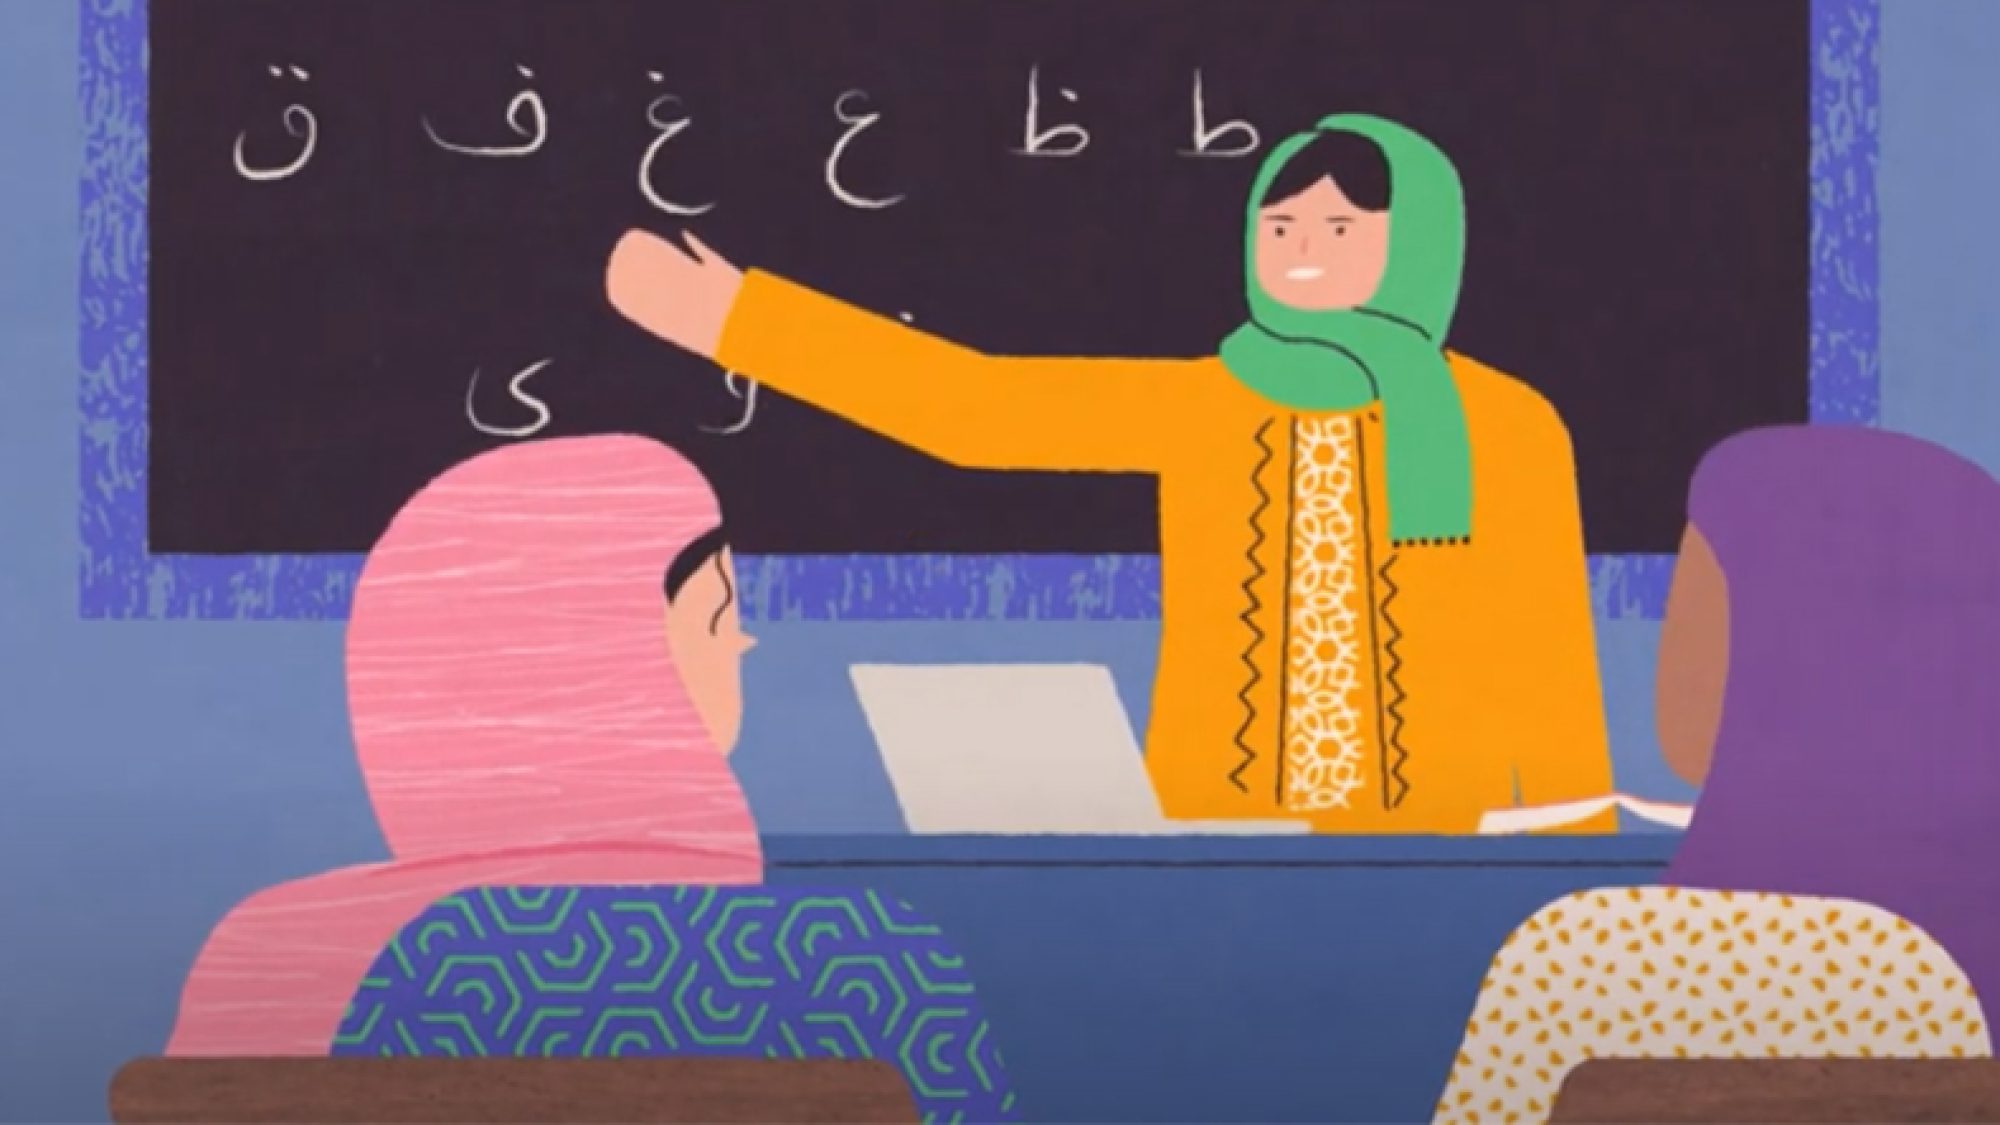 Illustration of a woman gesturing toward letters in a foreign language on a blackboard with two other women sitting